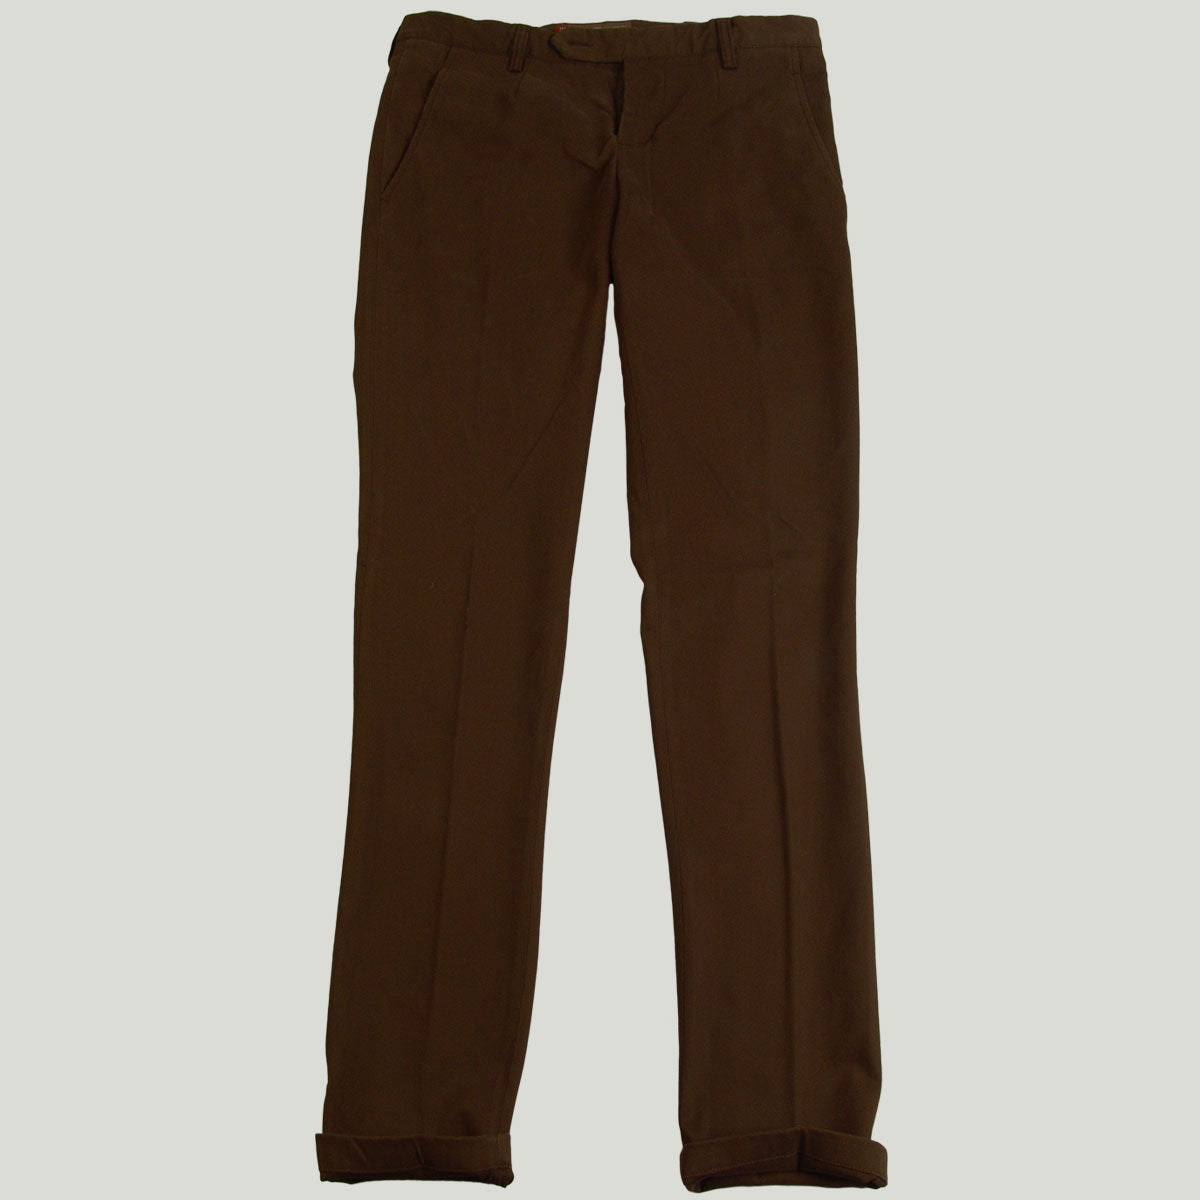 Cotton Stretch Chino Pants for Man